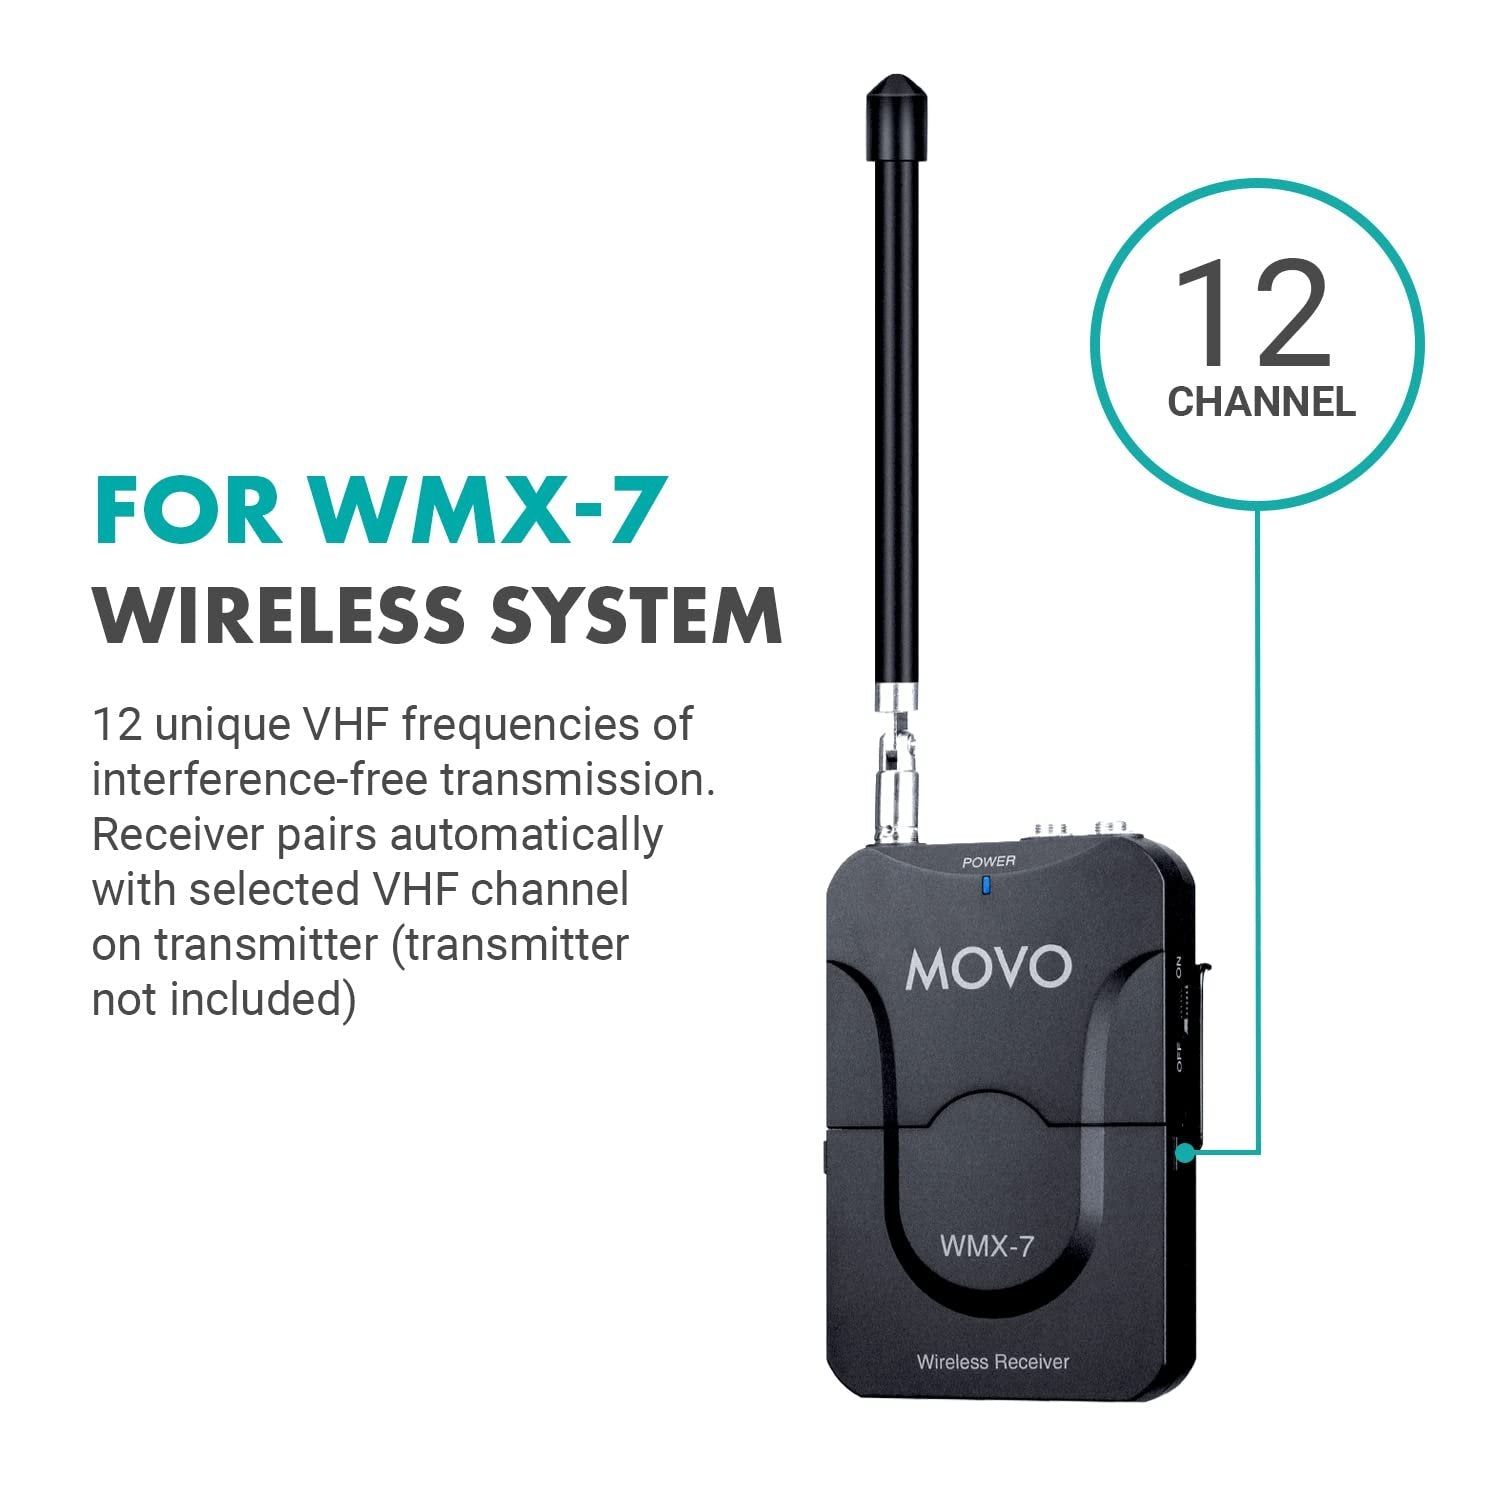 Movo WMX-7 RX Wireless Receiver for WMX-7 VHF Wireless Microphone System (Receiver Only)- Wireless Receiver for Handheld Microphones, Lavalier Mic Transmitters- Bodypack Receiver for Events, Recording